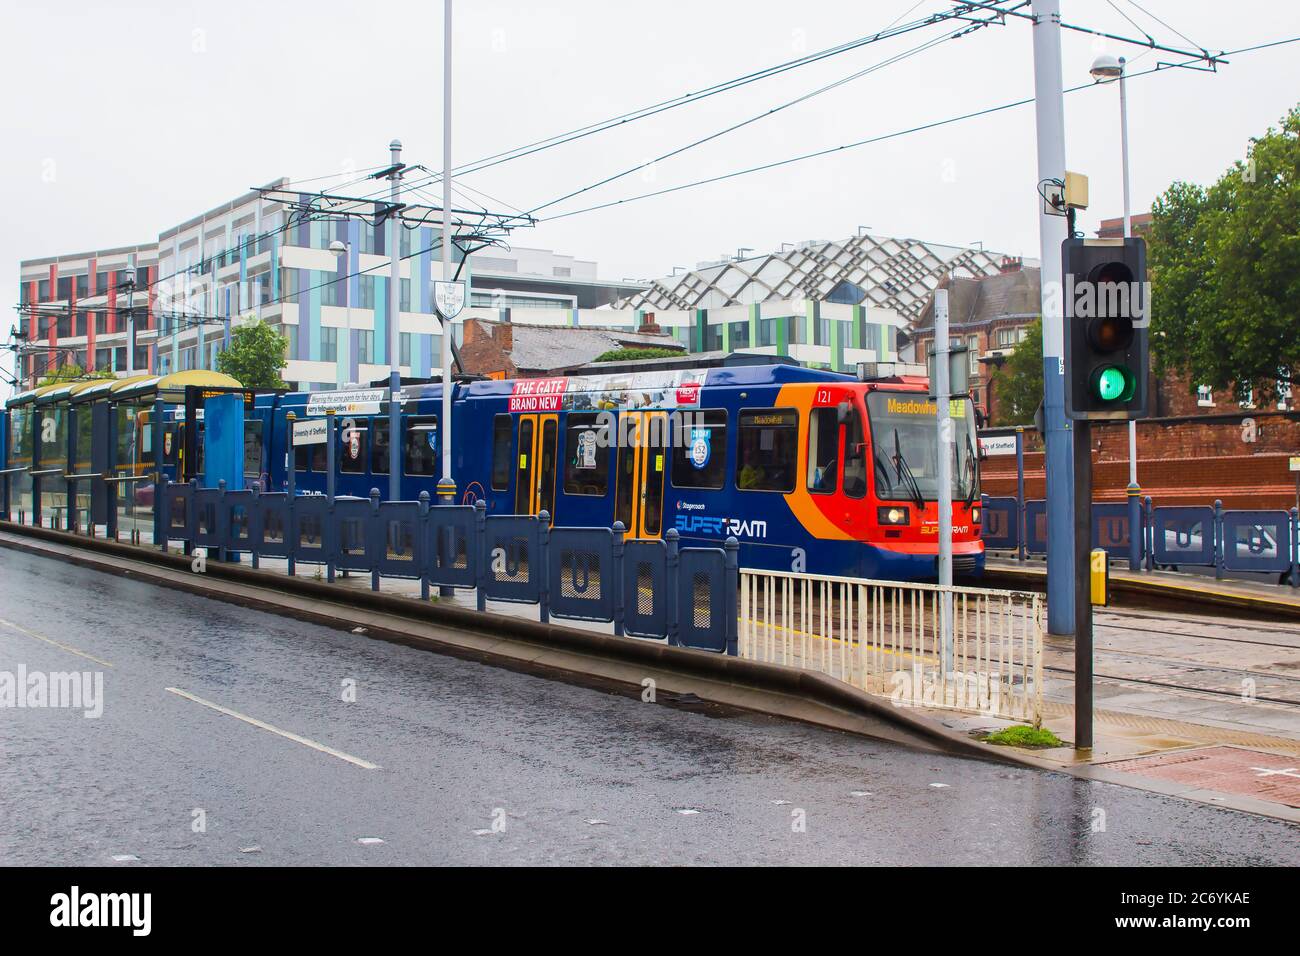 8 July 2021 This inward bound Sheffield Stagecoach Supertram at a stop on a wet misty day is one of a fleet of Siemens-Duewag Supertrams in operation Stock Photo